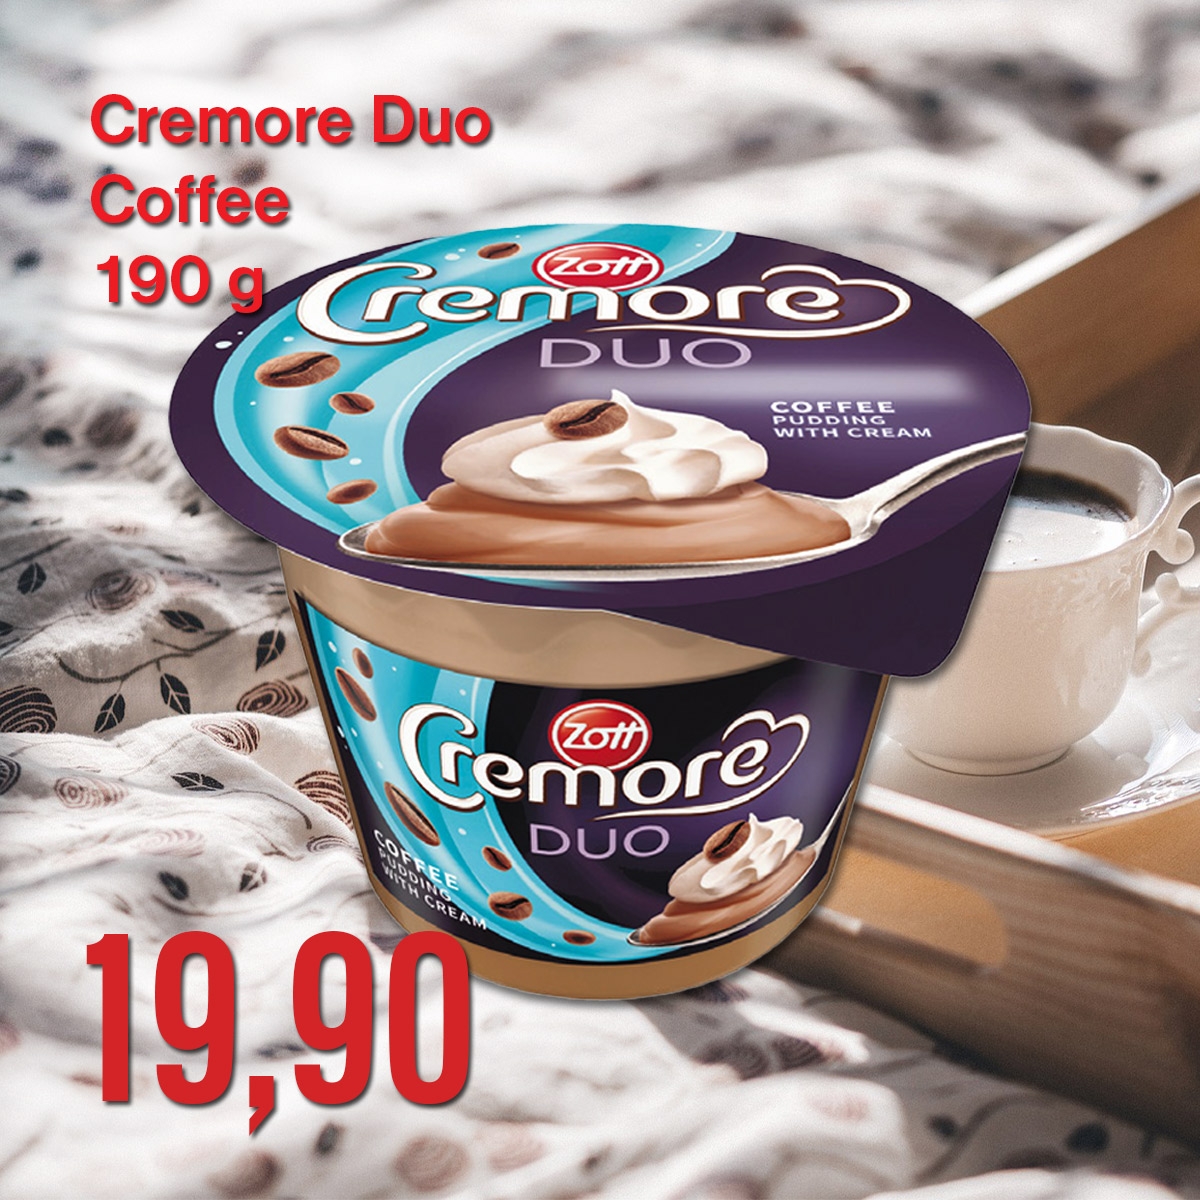 Cremore Duo Coffee 190 g